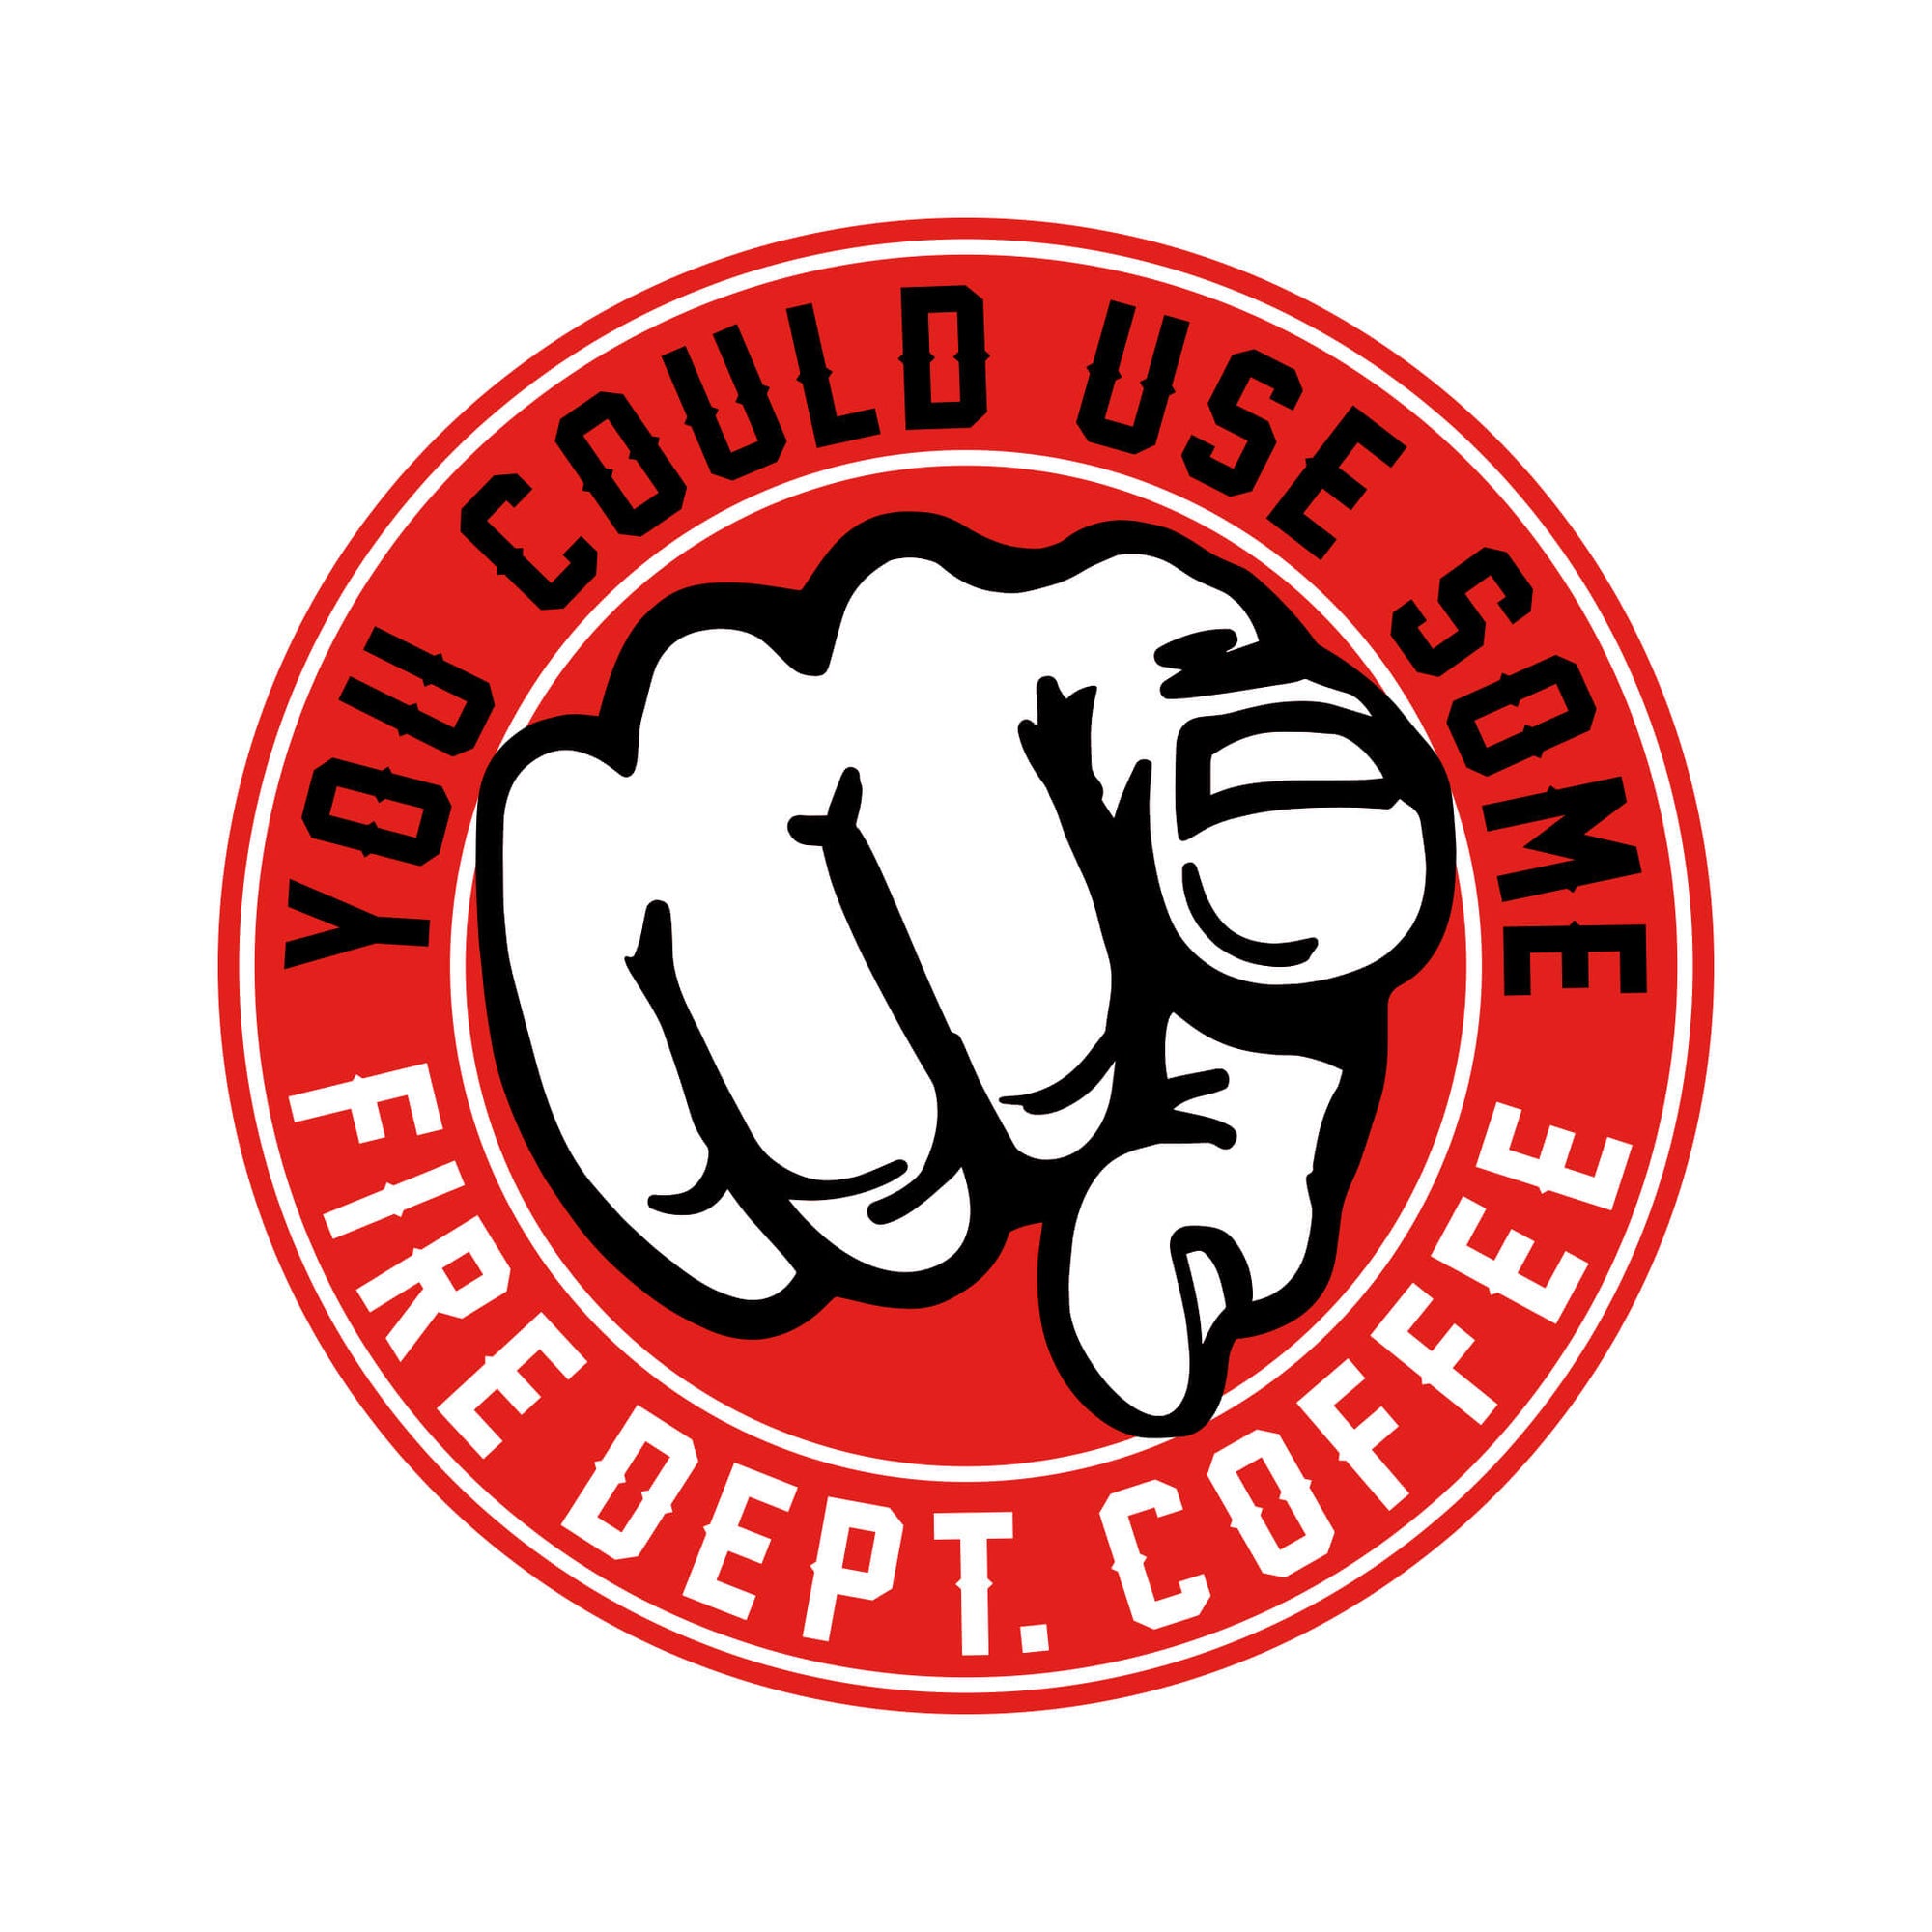 Red circle with finger pointing. Reads "you could use some fire dept. coffee"